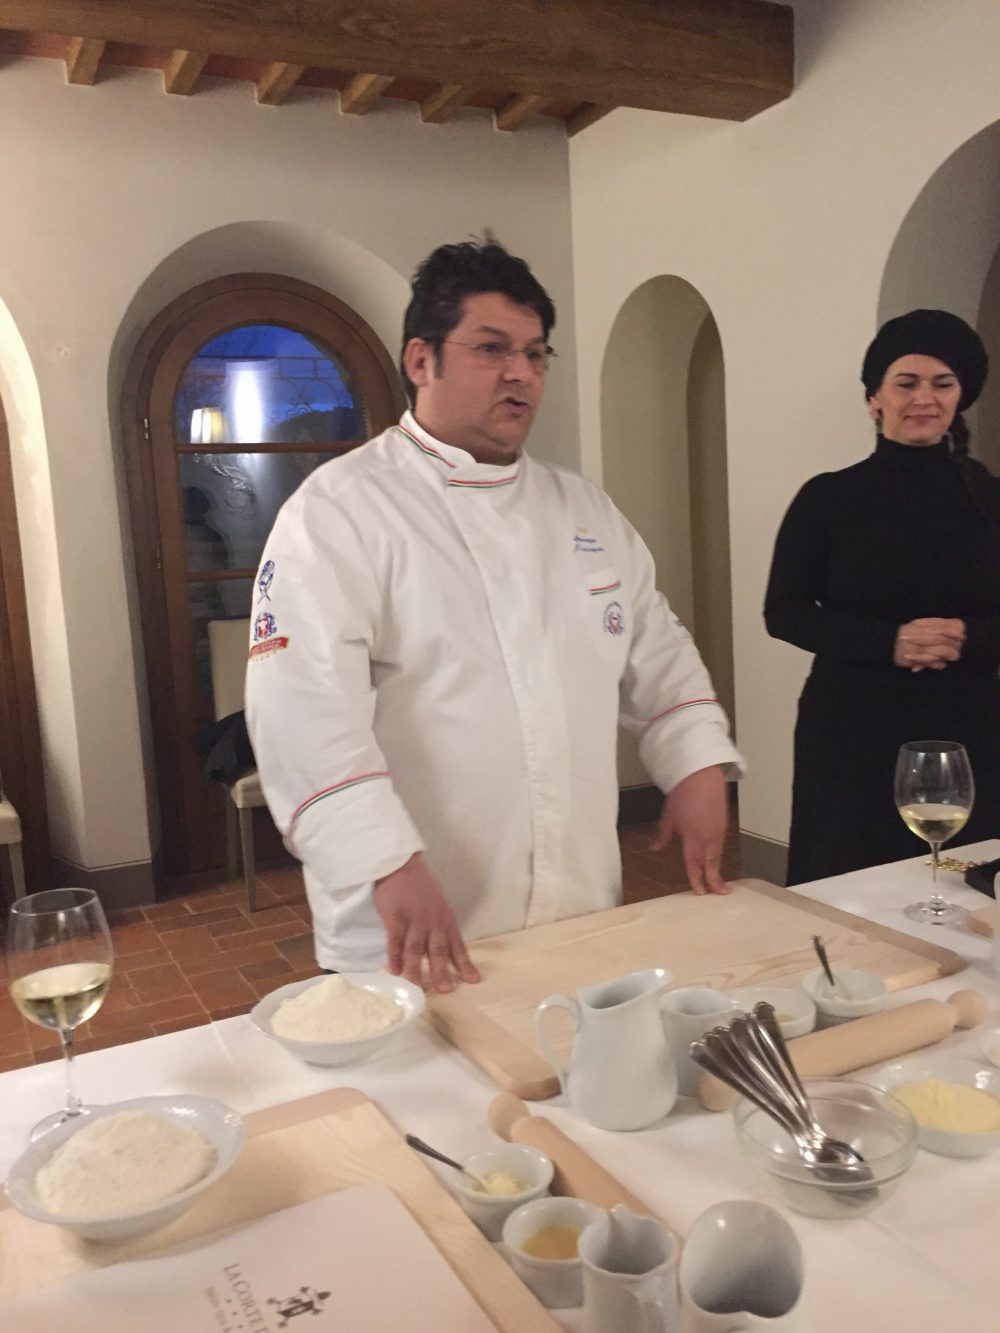 The chef only speaks Italian so we had a translator...